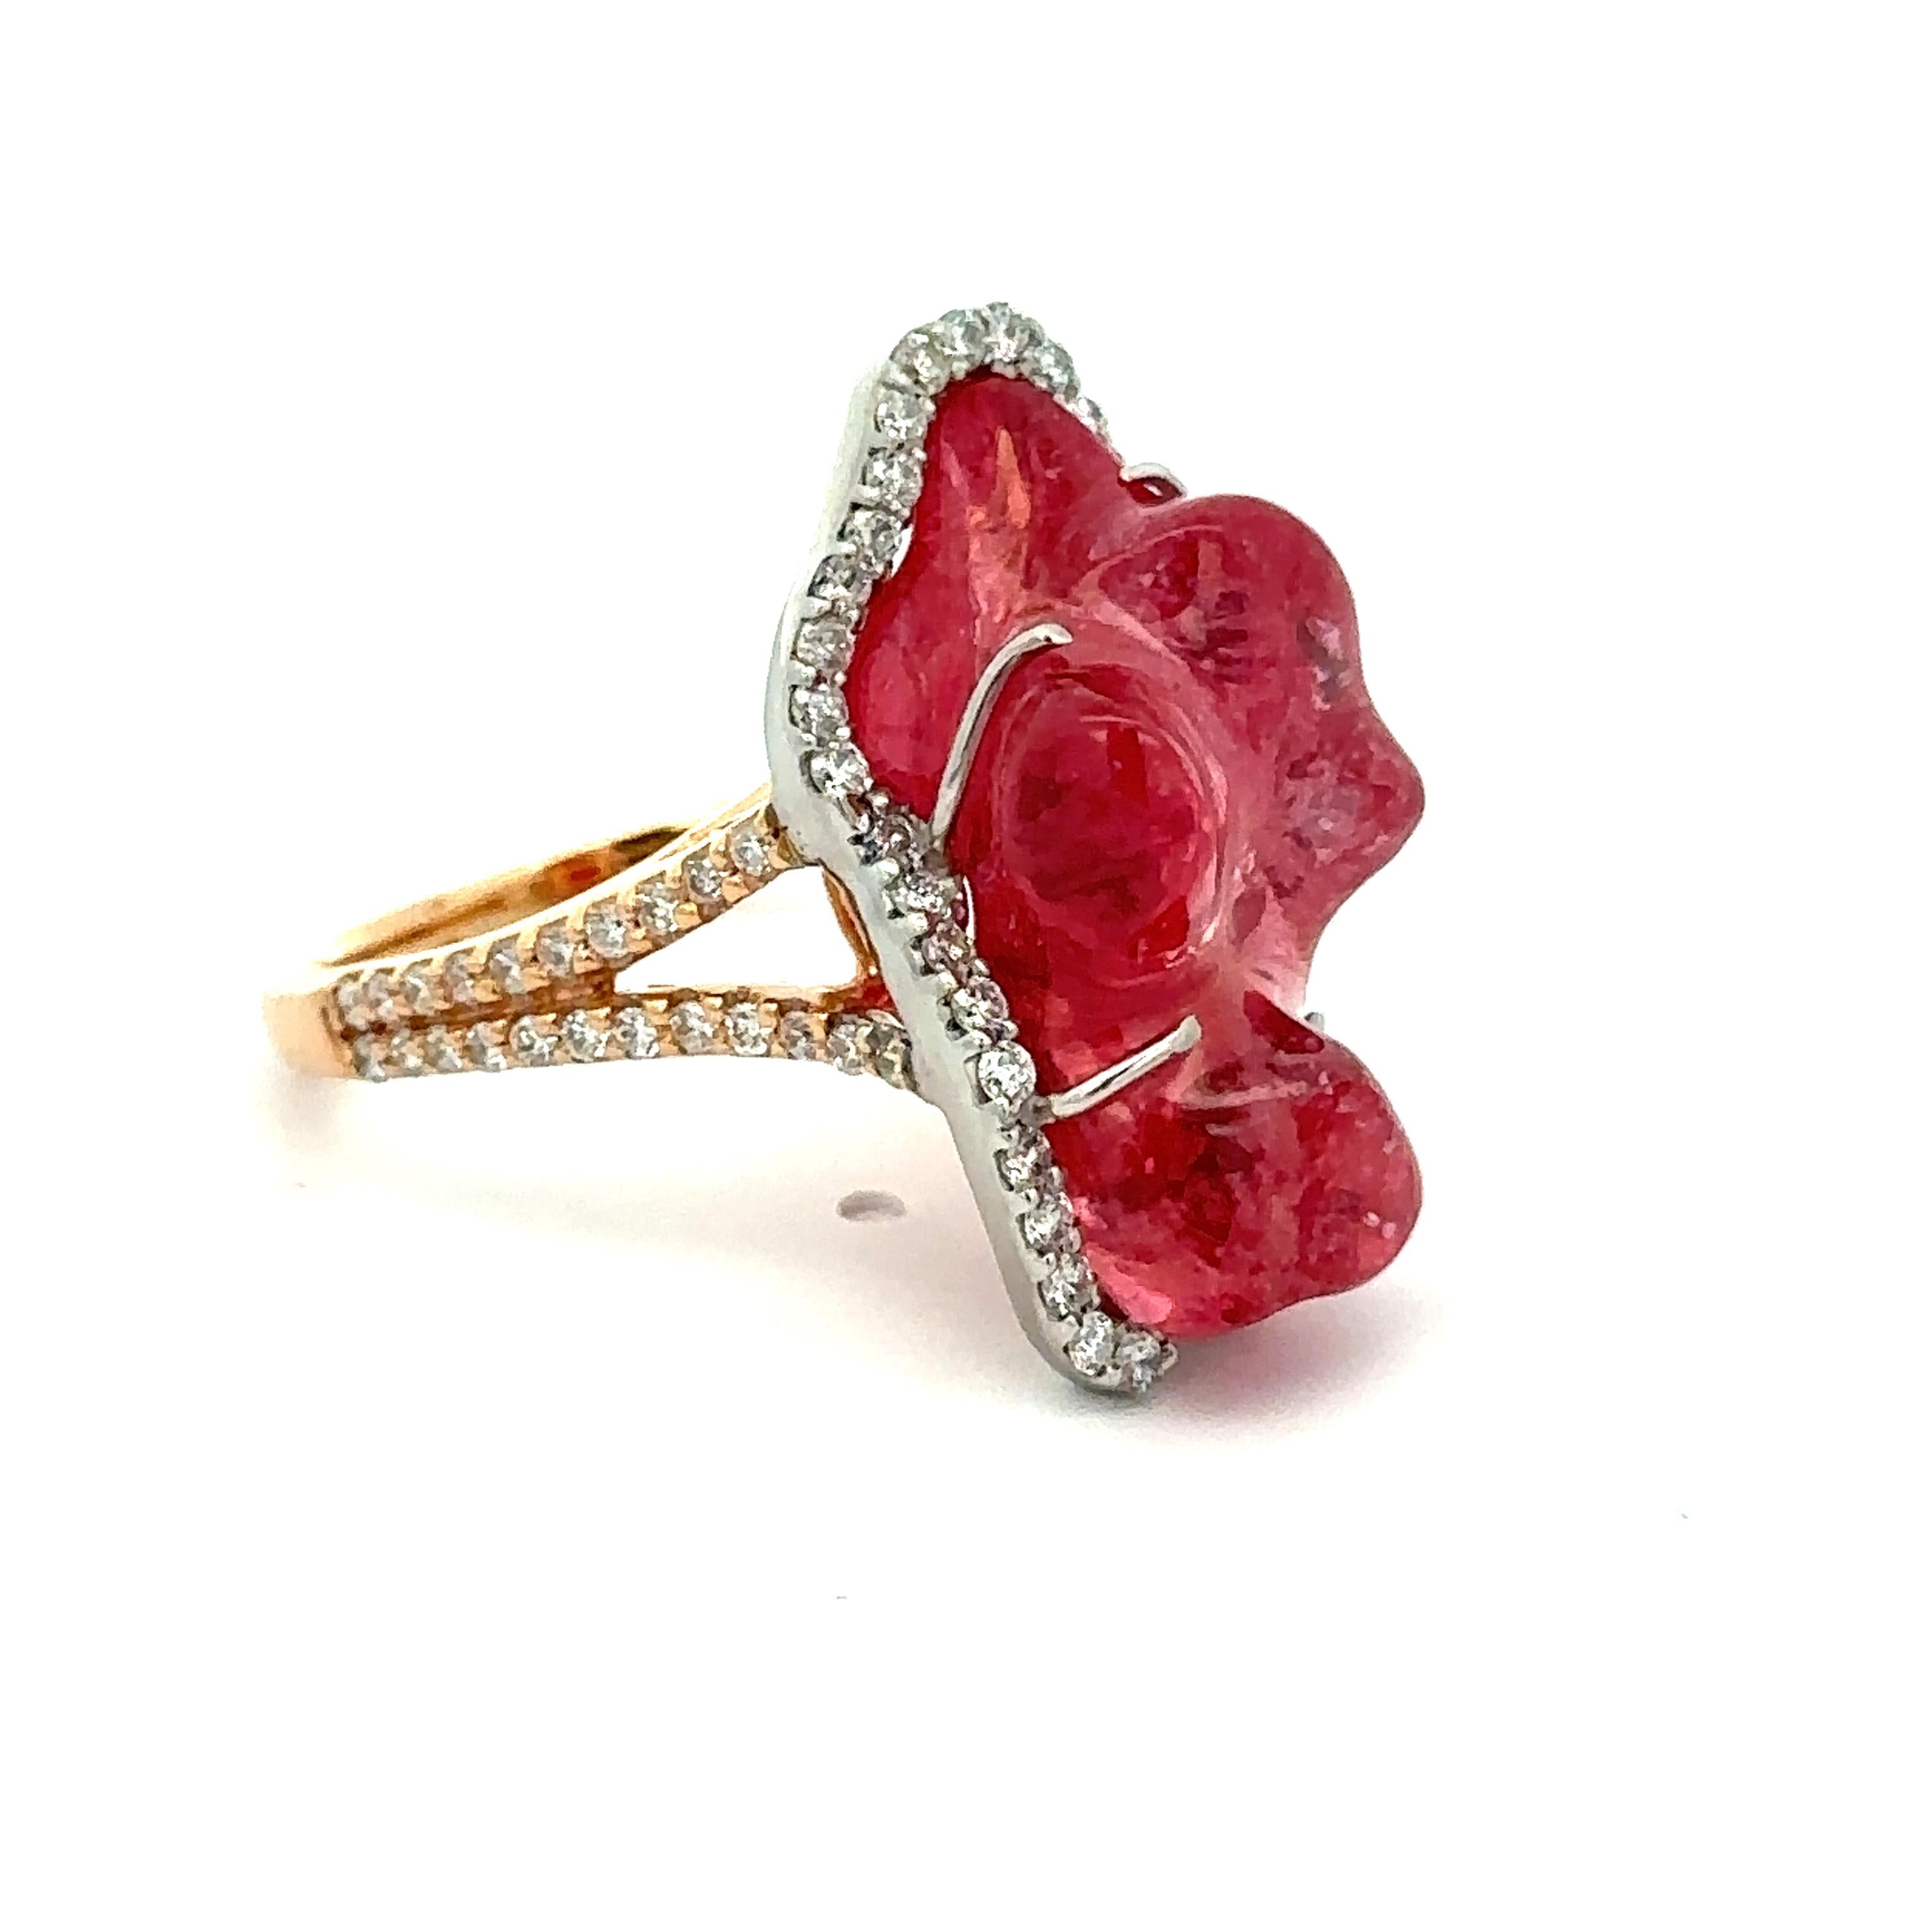 This wonderful rare and unique ring is signed by Kimberly McDonald! It is GIA certified as a unique tumbled Orangy-Pink Spinel! Truly magnificent ring from a top designer of our time! Enjoy!

--Stone(s):--
(1) Natural Genuine Spinel - Freeform